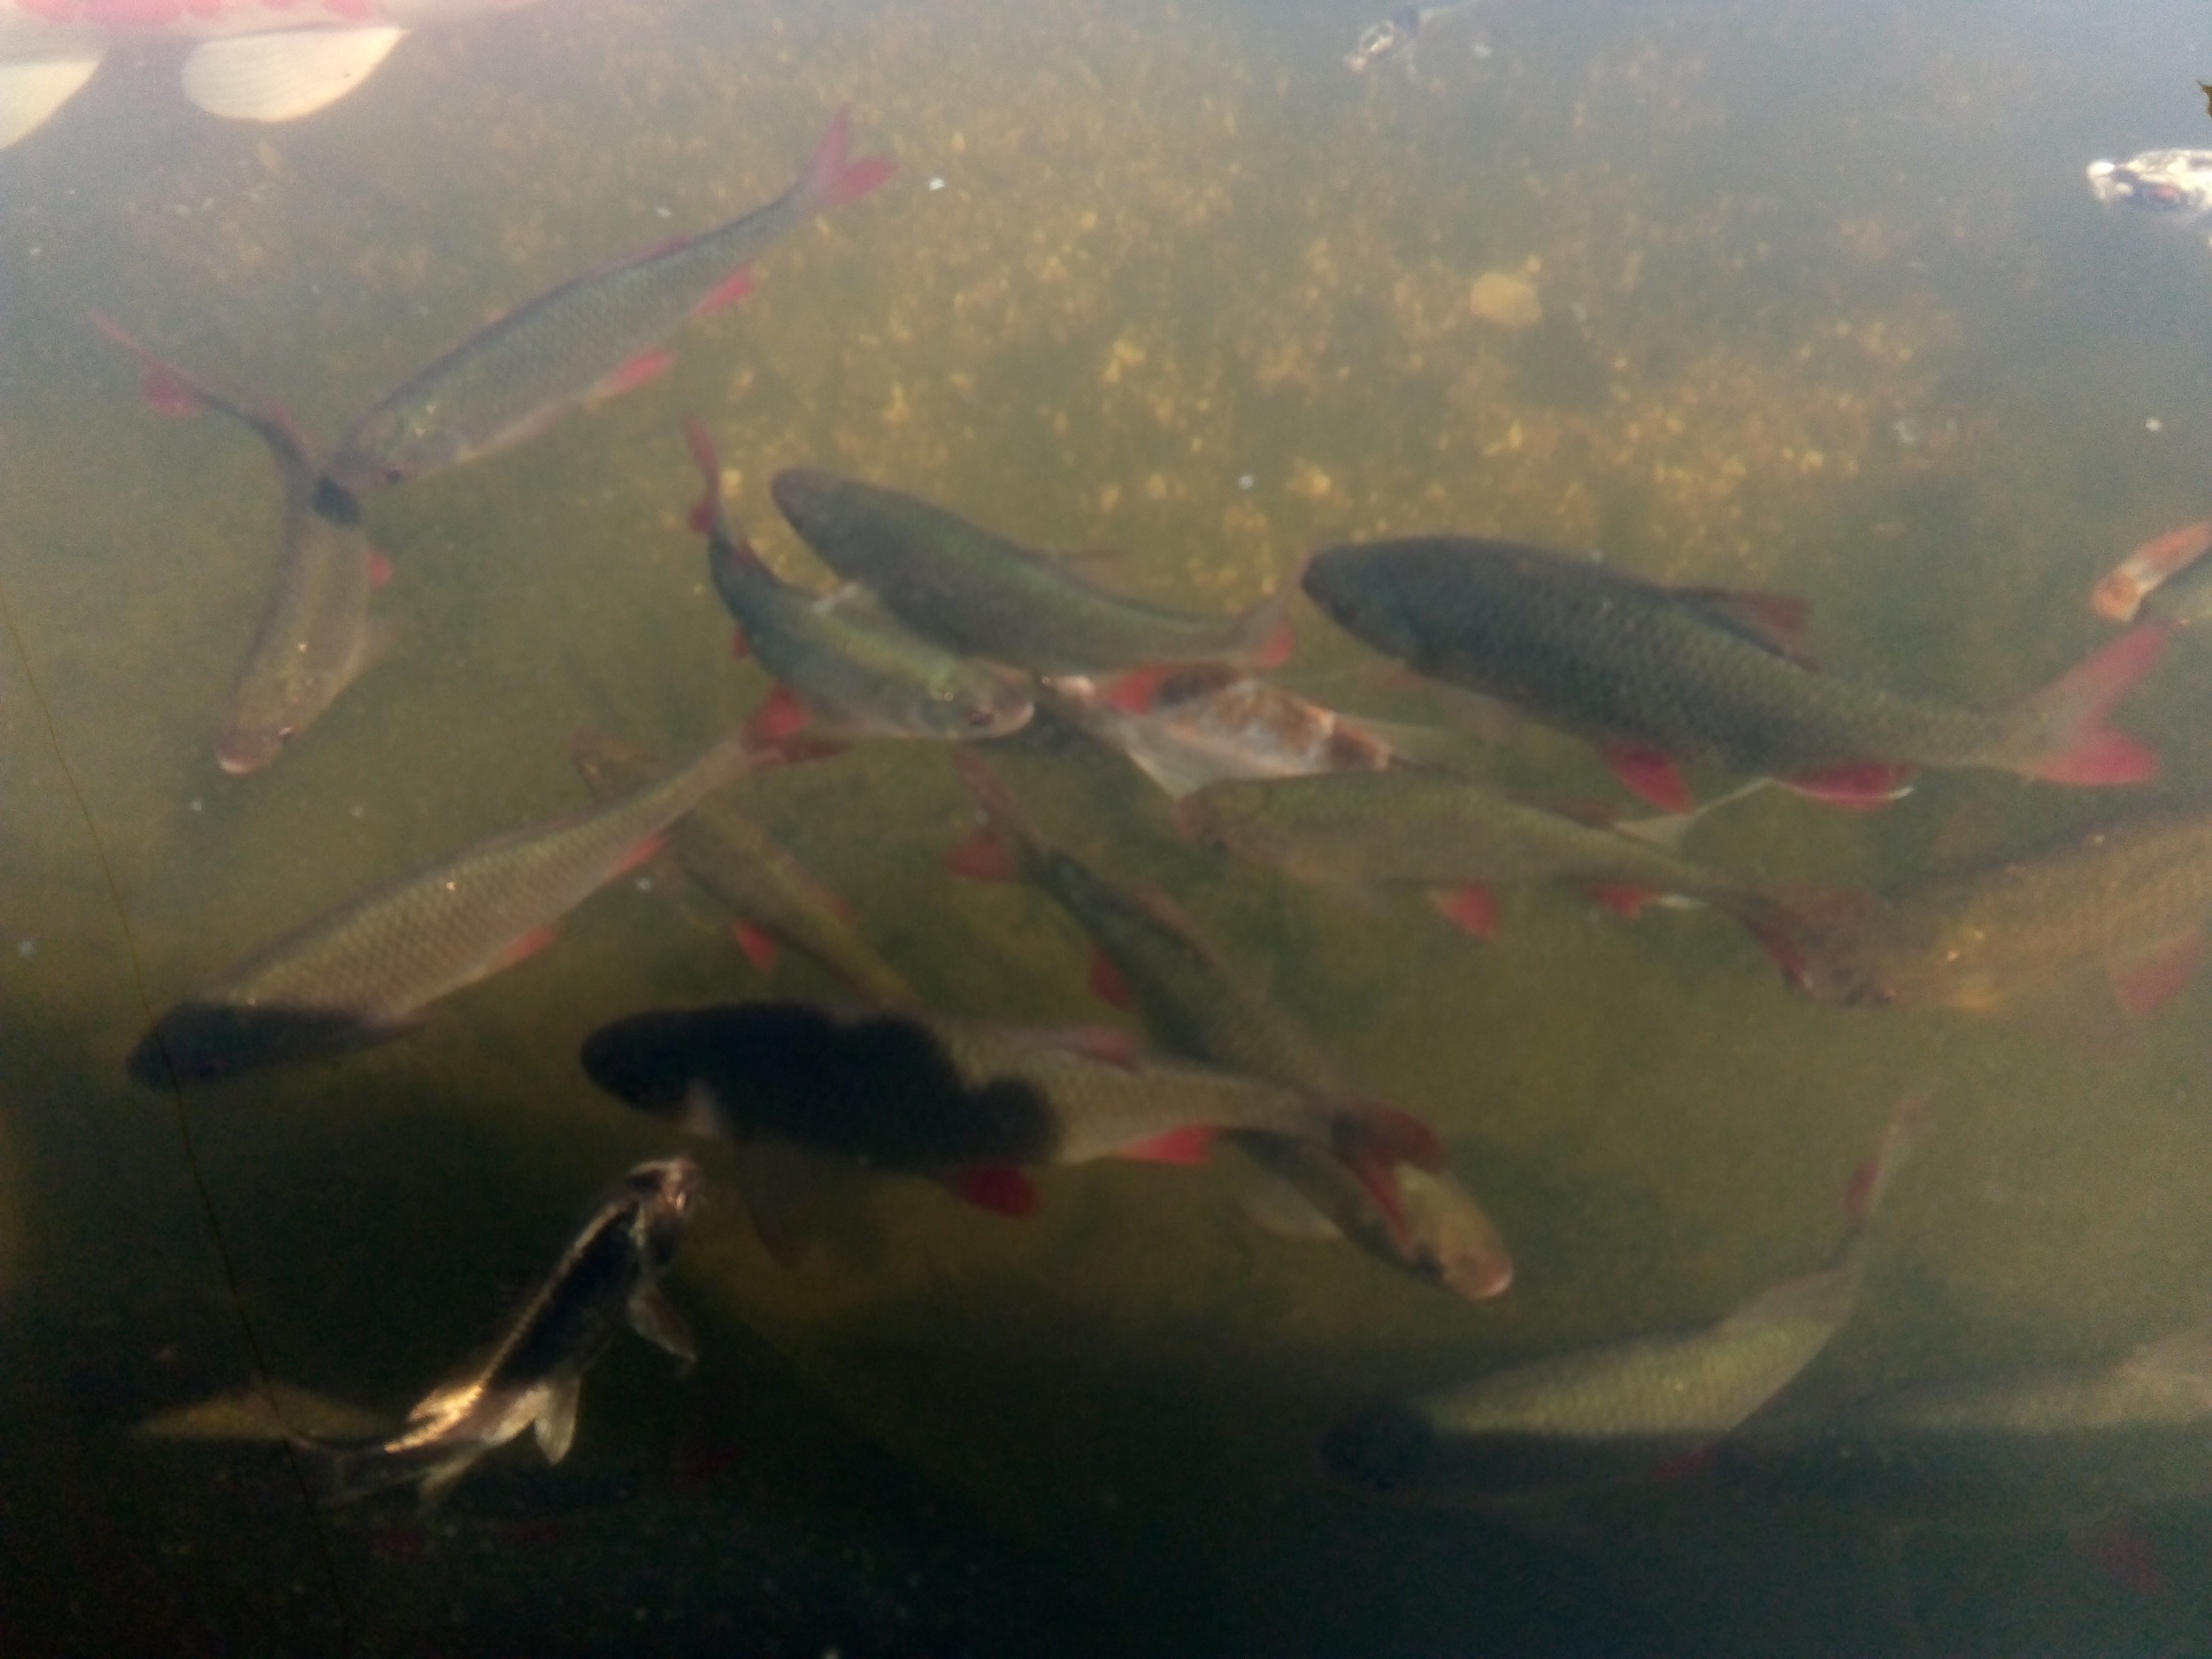 Shoal of small fish in pond